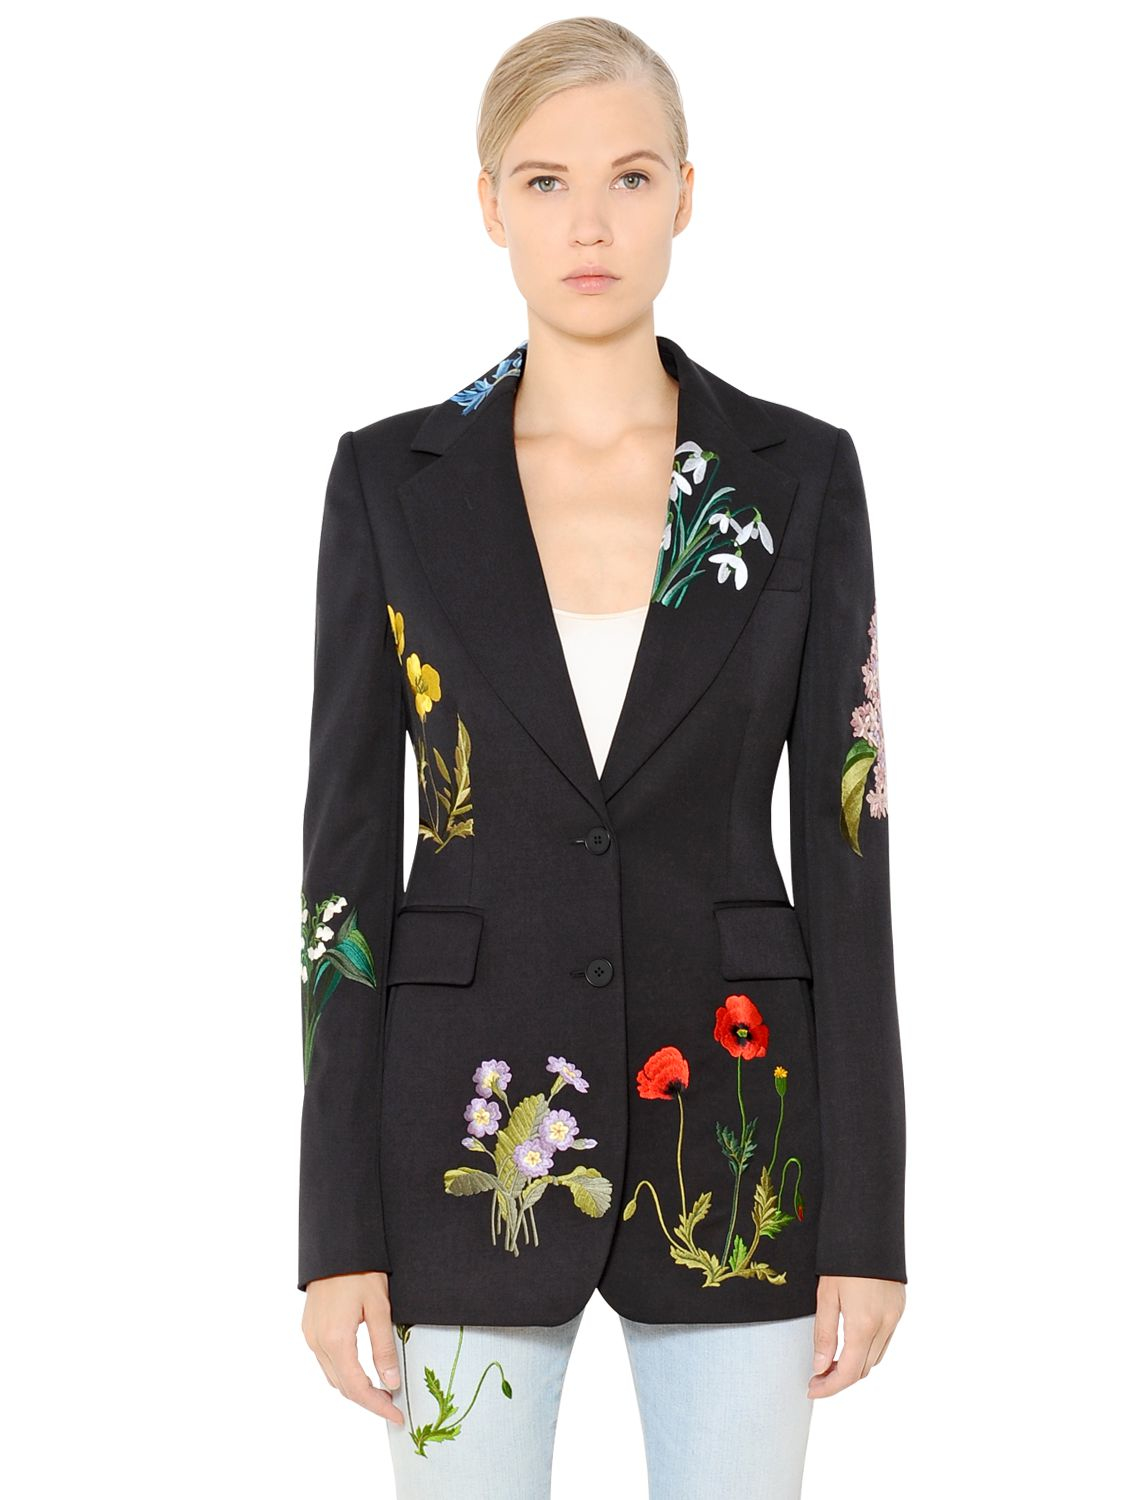 Lyst - Stella Mccartney Floral Embroidered Wool Tuxedo Jacket in Black